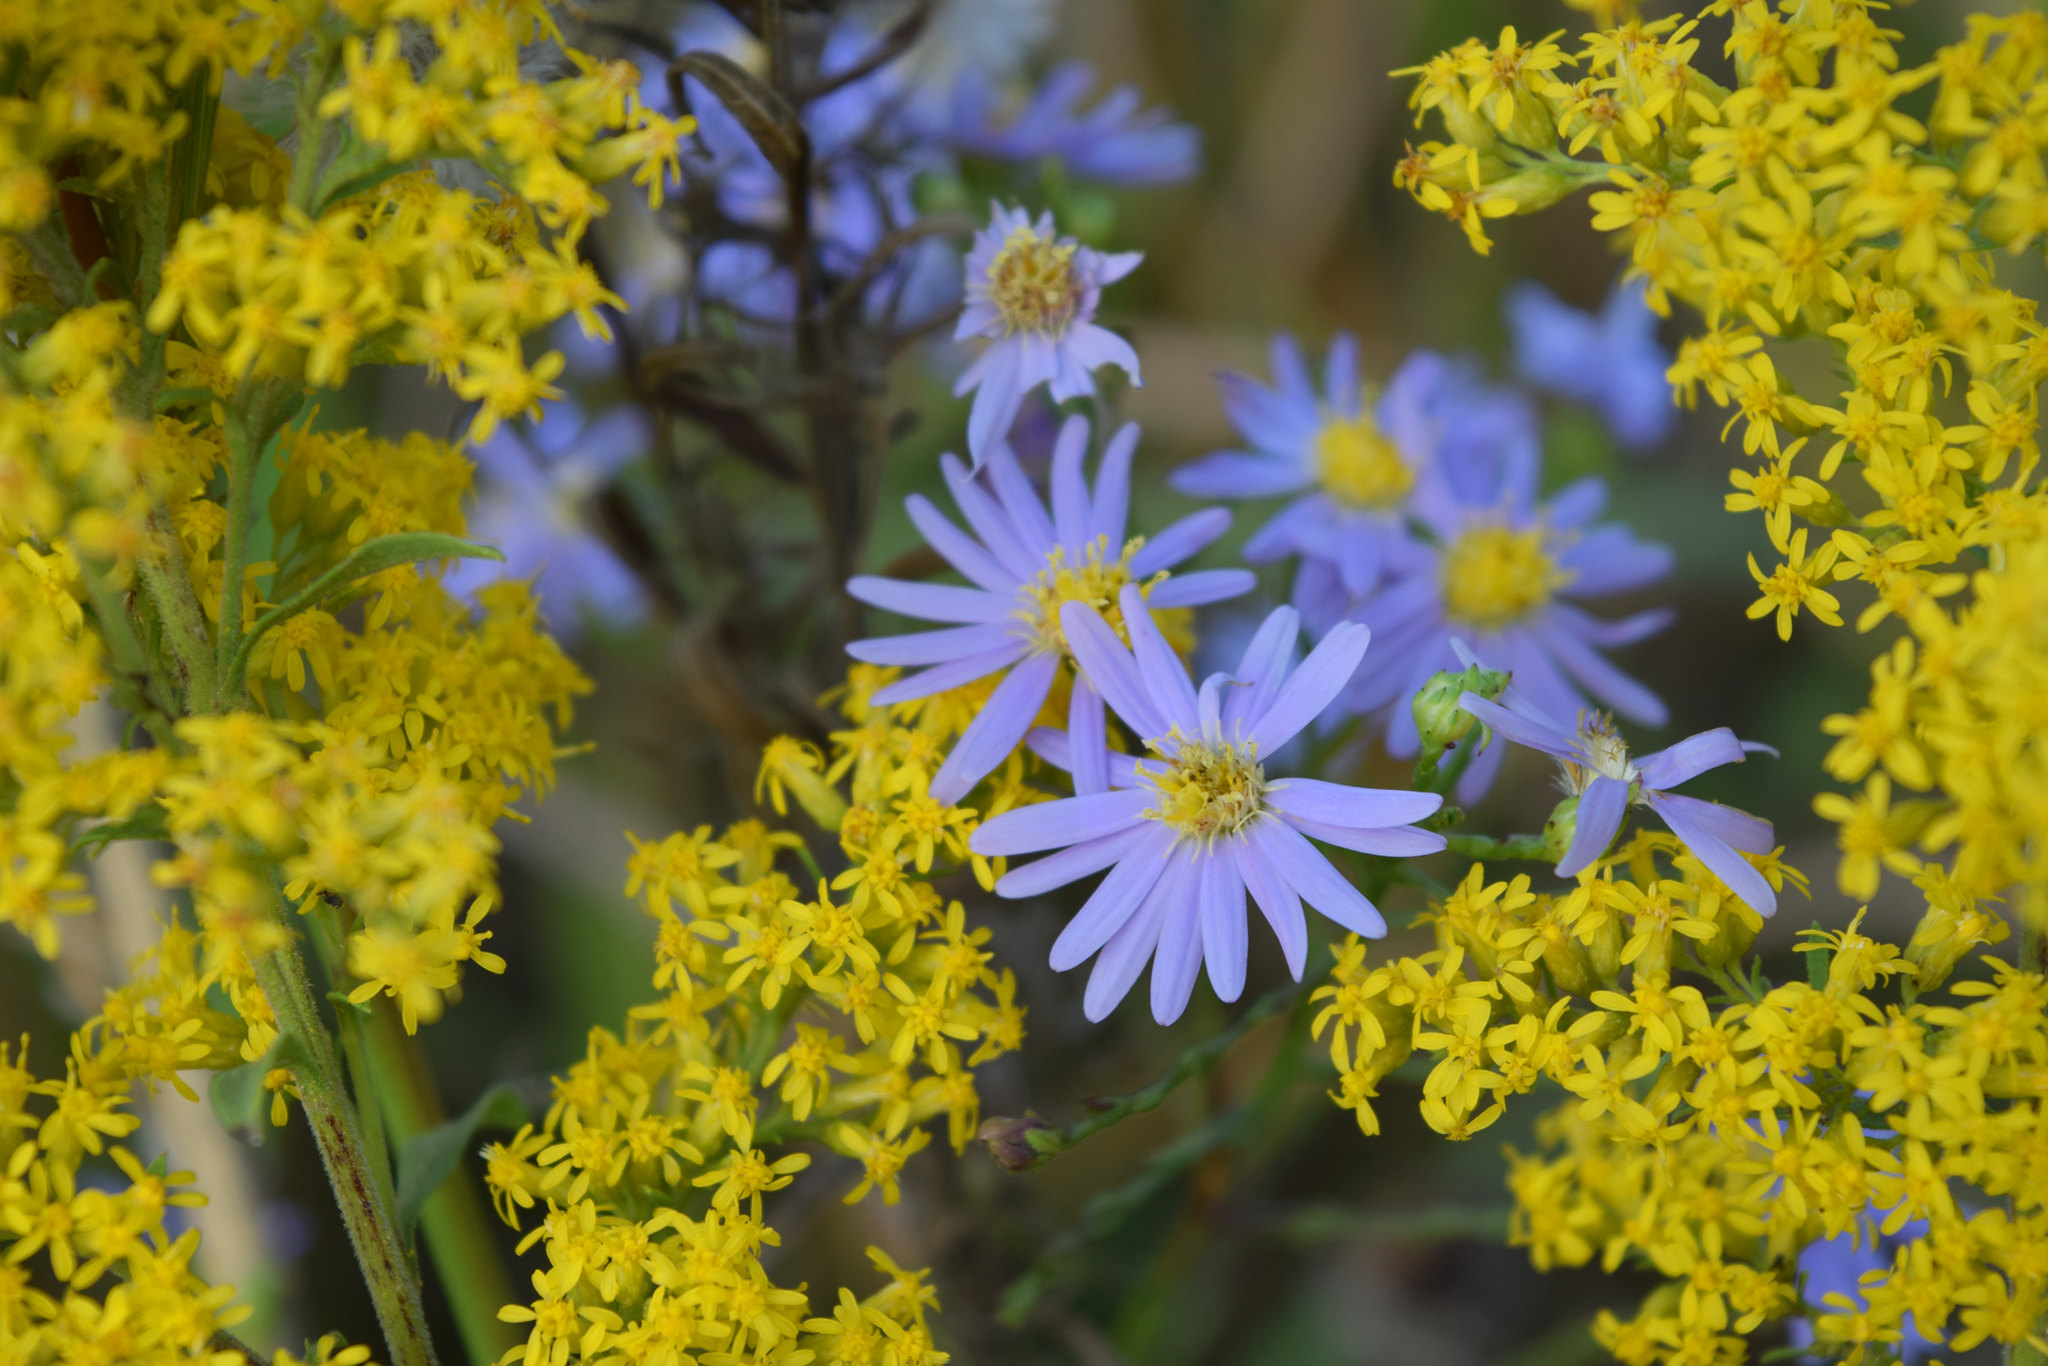 "golden rod and aster flowers in a meadow"